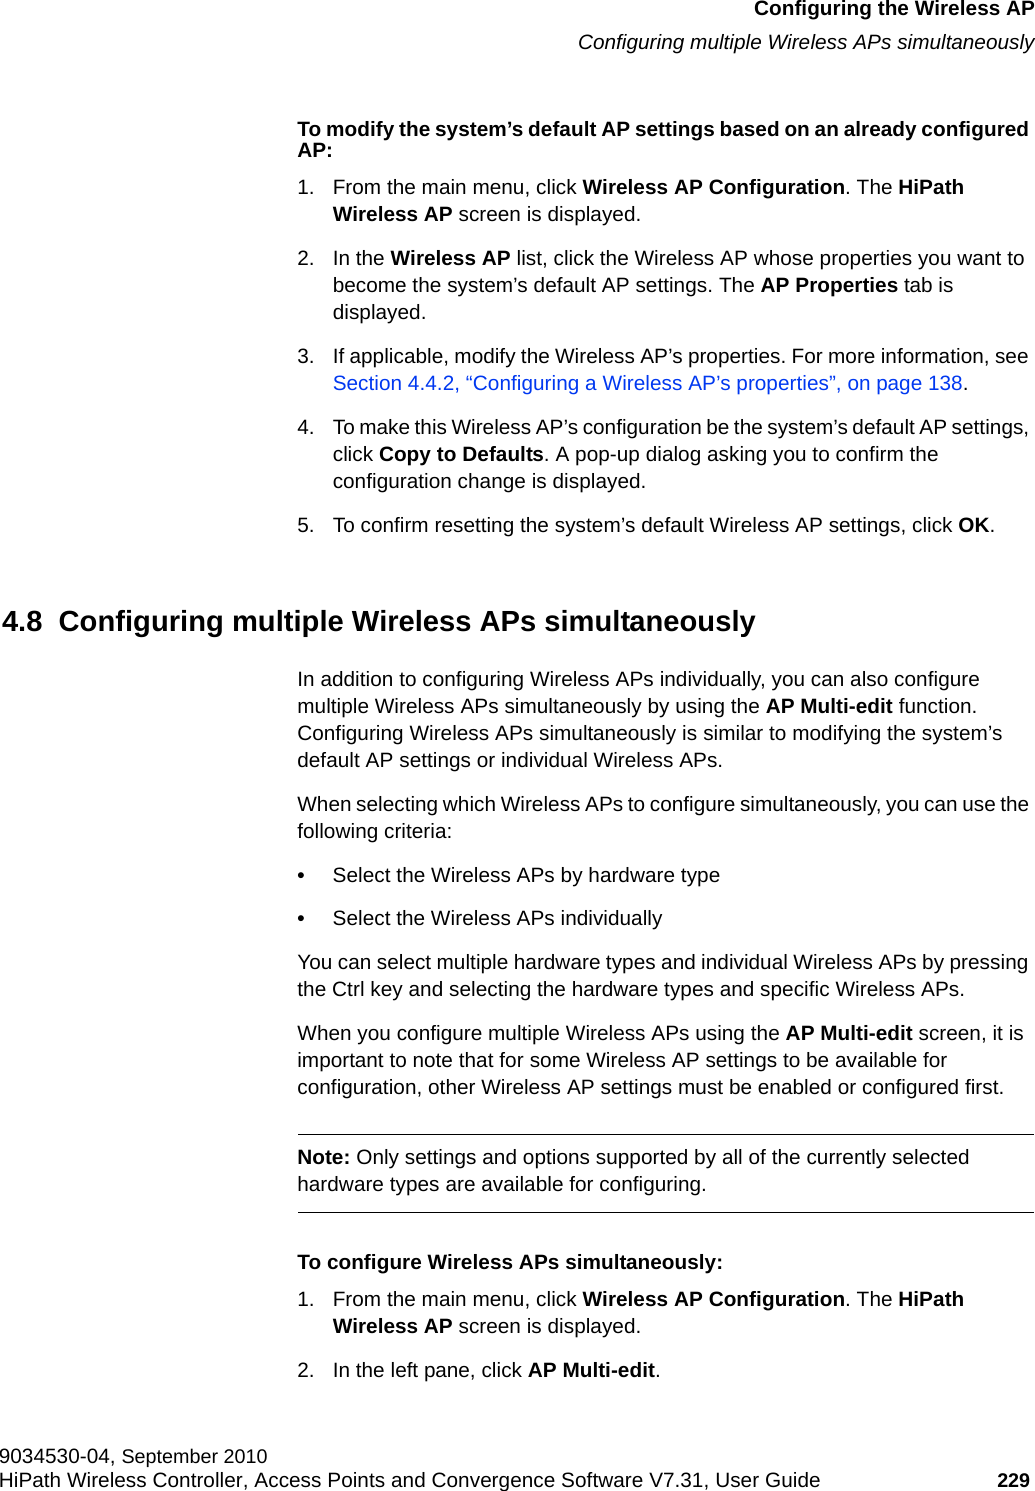 hwc_apstartup.fmConfiguring the Wireless APConfiguring multiple Wireless APs simultaneously9034530-04, September 2010HiPath Wireless Controller, Access Points and Convergence Software V7.31, User Guide 229         To modify the system’s default AP settings based on an already configured AP:1. From the main menu, click Wireless AP Configuration. The HiPath Wireless AP screen is displayed.2. In the Wireless AP list, click the Wireless AP whose properties you want to become the system’s default AP settings. The AP Properties tab is displayed.3. If applicable, modify the Wireless AP’s properties. For more information, see Section 4.4.2, “Configuring a Wireless AP’s properties”, on page 138.4. To make this Wireless AP’s configuration be the system’s default AP settings, click Copy to Defaults. A pop-up dialog asking you to confirm the configuration change is displayed.5. To confirm resetting the system’s default Wireless AP settings, click OK.4.8  Configuring multiple Wireless APs simultaneouslyIn addition to configuring Wireless APs individually, you can also configure multiple Wireless APs simultaneously by using the AP Multi-edit function. Configuring Wireless APs simultaneously is similar to modifying the system’s default AP settings or individual Wireless APs. When selecting which Wireless APs to configure simultaneously, you can use the following criteria:•Select the Wireless APs by hardware type•Select the Wireless APs individuallyYou can select multiple hardware types and individual Wireless APs by pressing the Ctrl key and selecting the hardware types and specific Wireless APs.When you configure multiple Wireless APs using the AP Multi-edit screen, it is important to note that for some Wireless AP settings to be available for configuration, other Wireless AP settings must be enabled or configured first.Note: Only settings and options supported by all of the currently selected hardware types are available for configuring.To configure Wireless APs simultaneously:1. From the main menu, click Wireless AP Configuration. The HiPath Wireless AP screen is displayed.2. In the left pane, click AP Multi-edit.